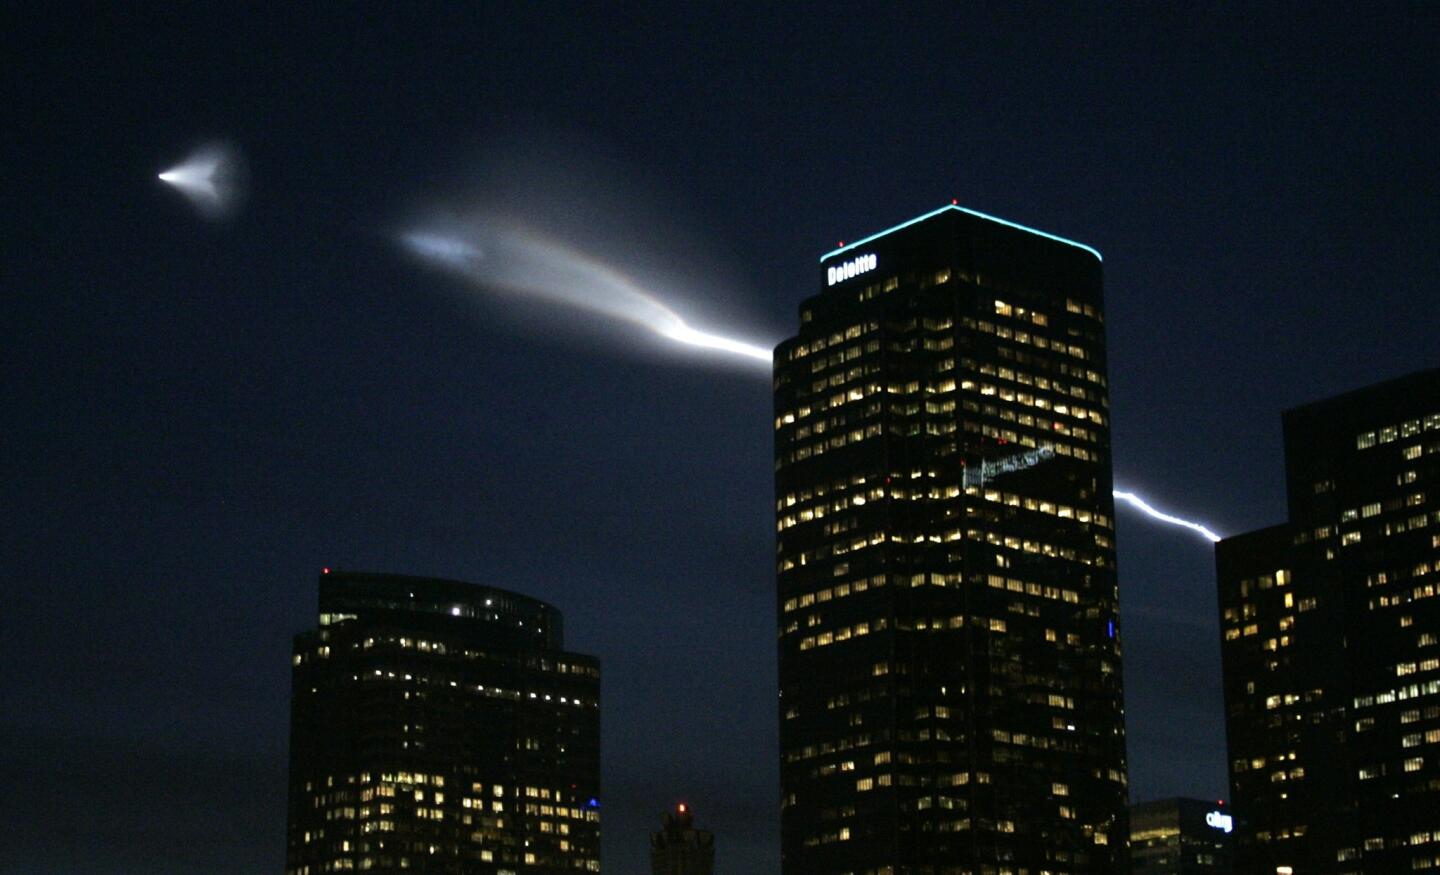 A Minotaur I rocket carrying an Air Force satellite into orbit creates a spectacular display as it streaks above downtown Los Angeles in September 2005.